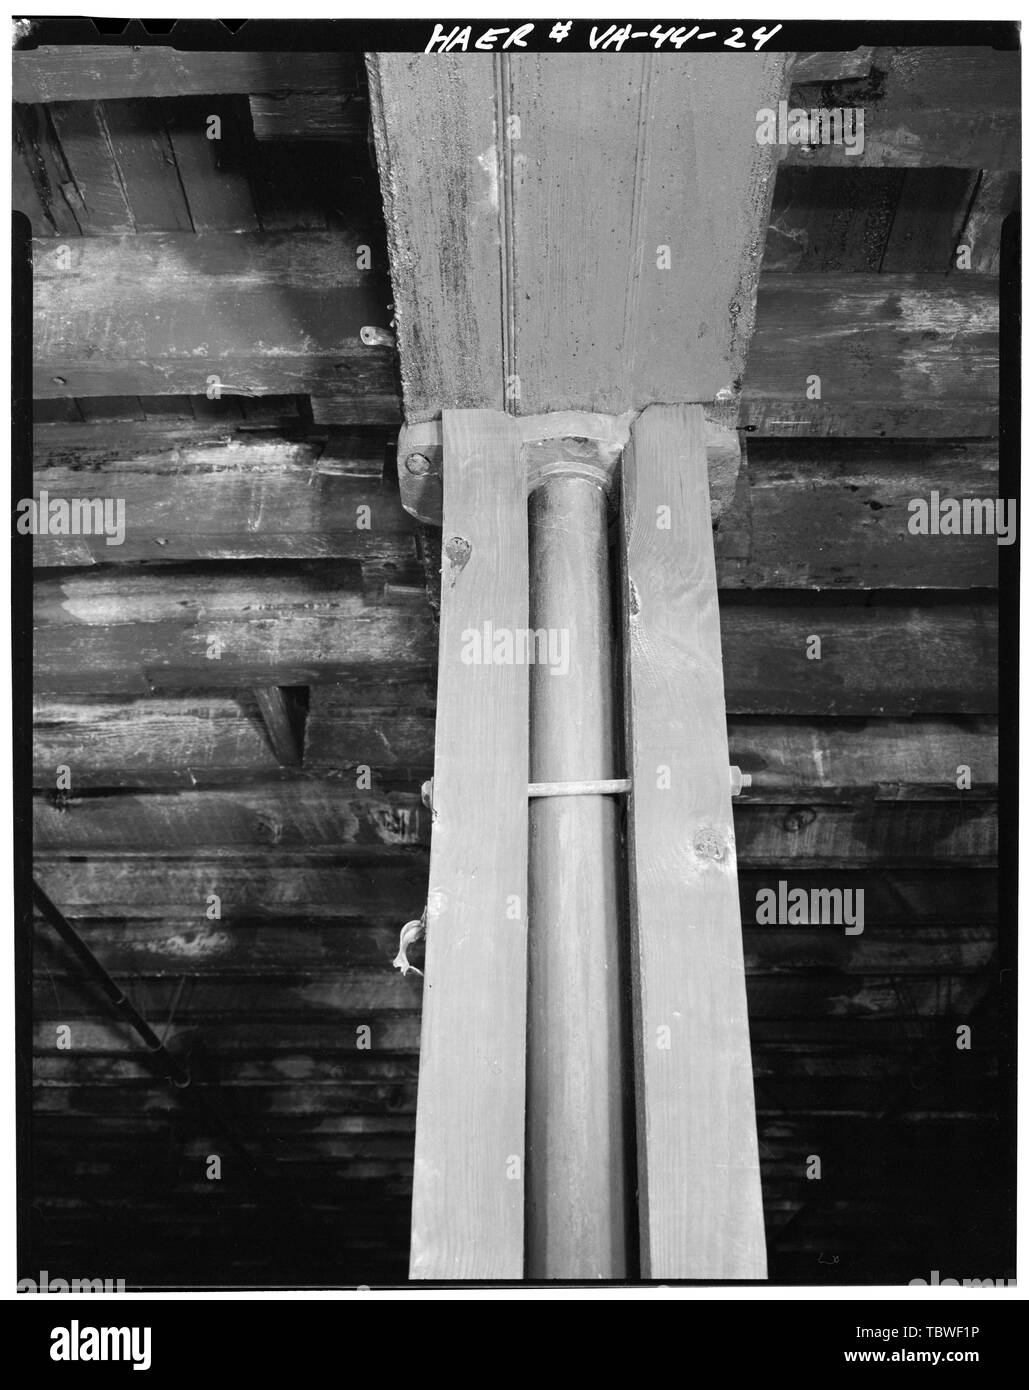 MANCHESTER MILL, DETAIL OF REINFORCED COLUMN.  Manchester Cotton and Woolen Manufacturing Company, Southern Bank of James River at Mayo Bridge, Richmond, Independent City, VA Stock Photo